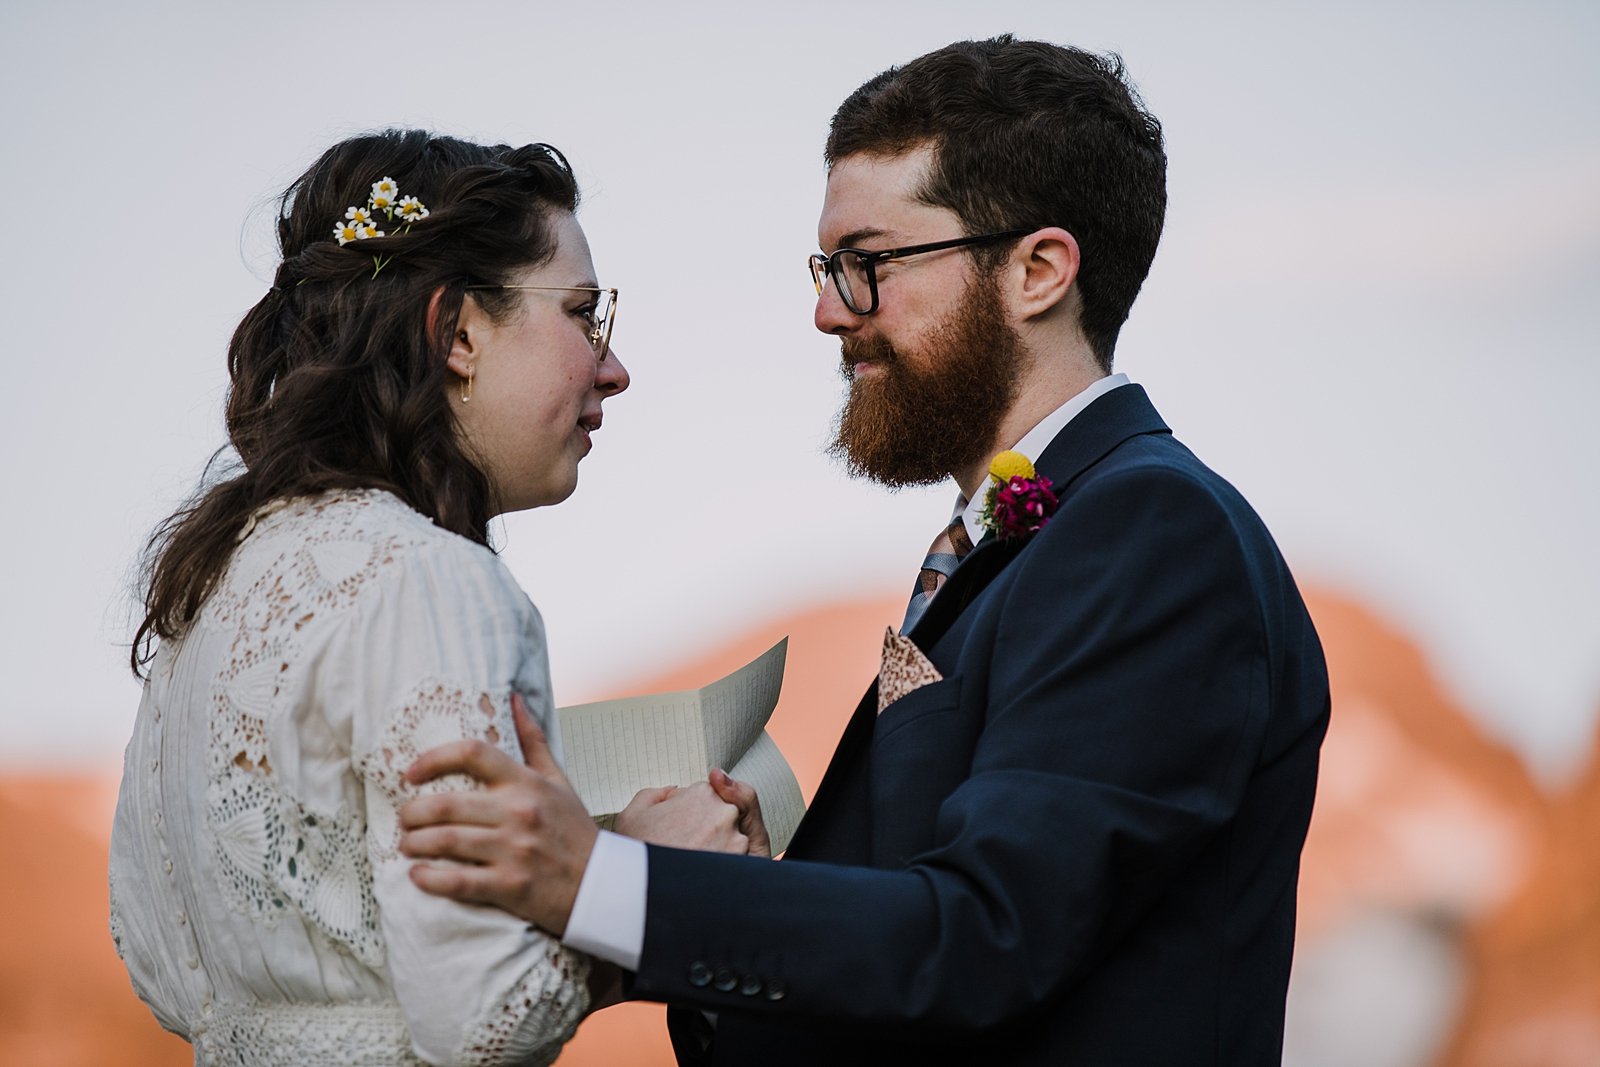 bride sharing handwritten vows, colorado mountain alpenglow, sunrise in the indian peaks wilderness, intimate elopement ceremony, rocky mountain sunrise